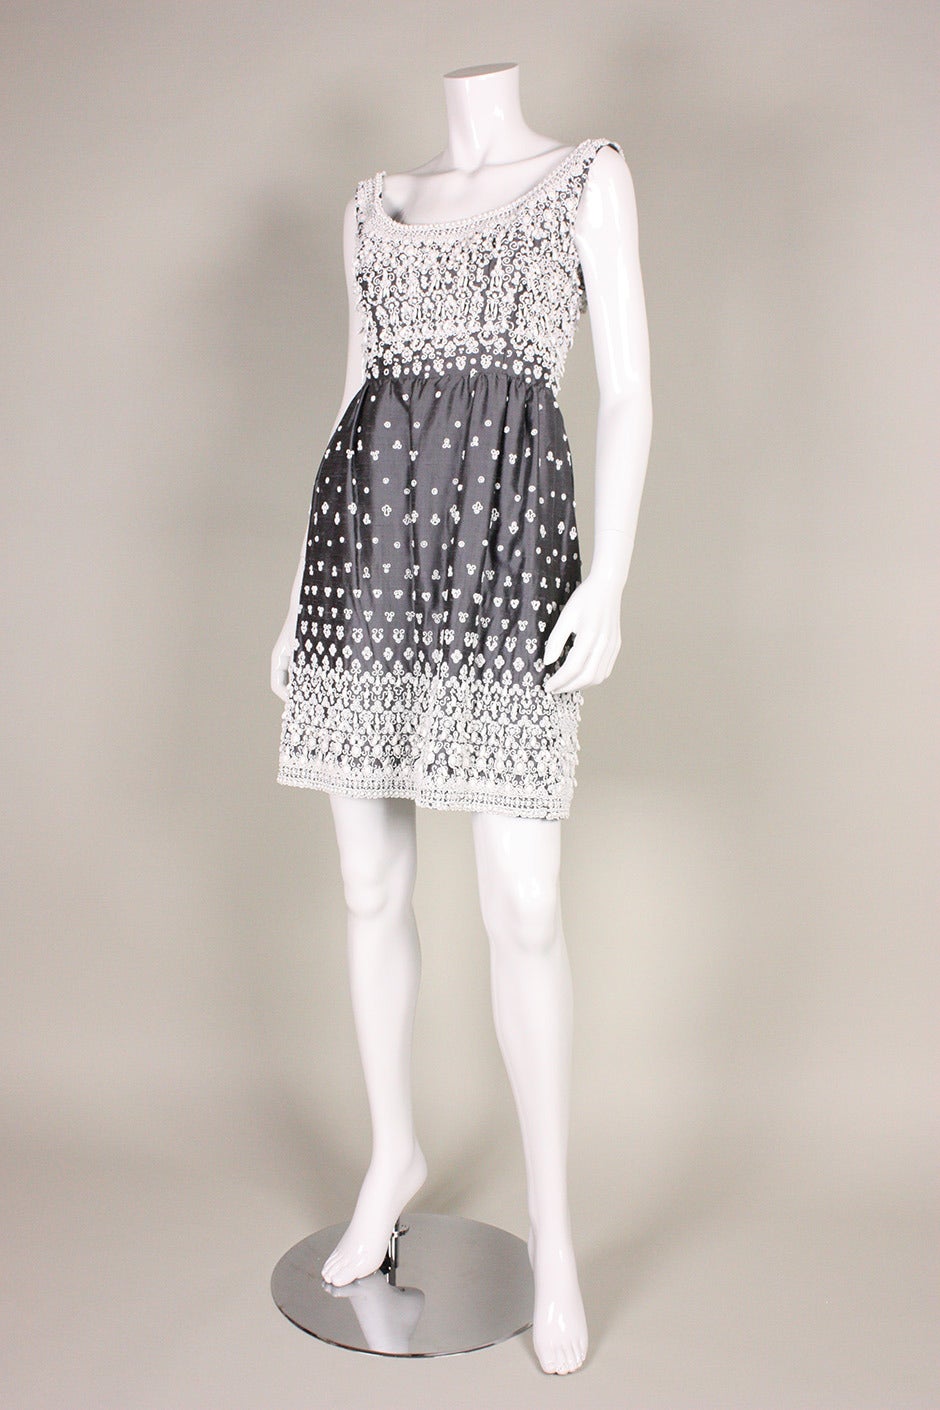 Women's 1960's Cocktail Dress with Hand-Beading